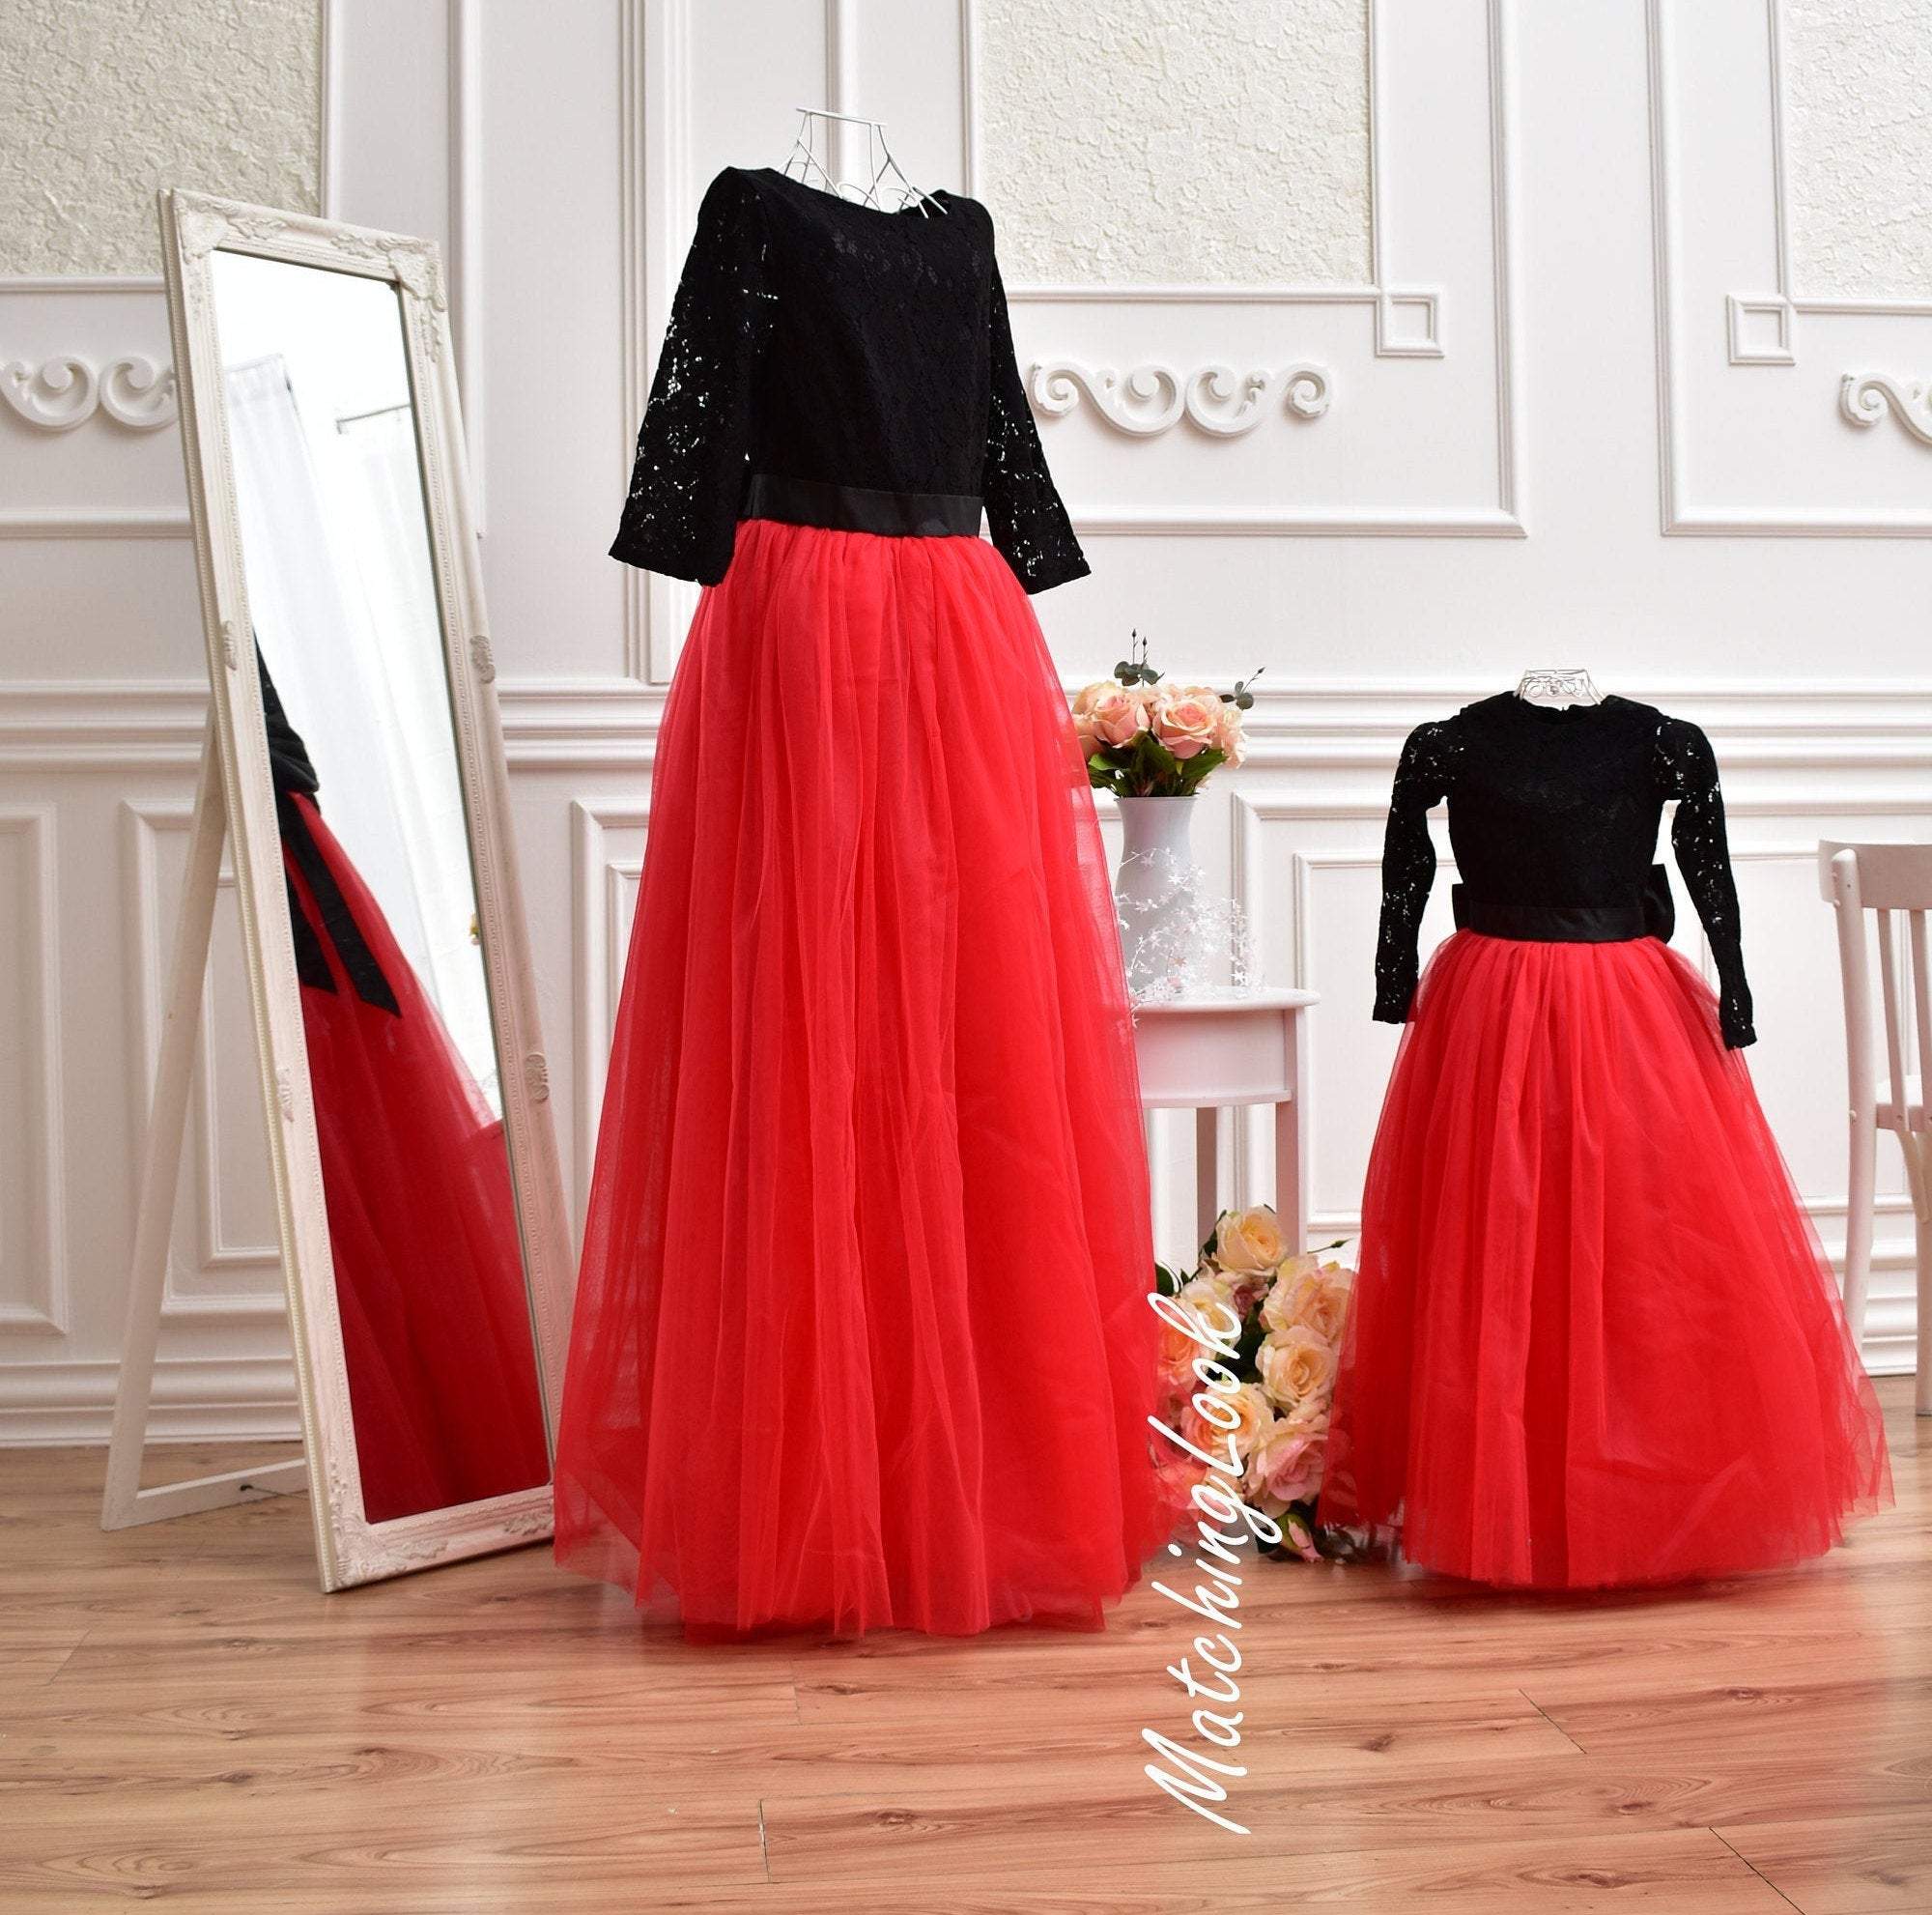 Red And Black Gothic Black Ballgown Wedding Dress With Lace Up Back  Medieval Vampire Bride Gresses Robe De Mariee From Veralove999, $150.48 |  DHgate.Com